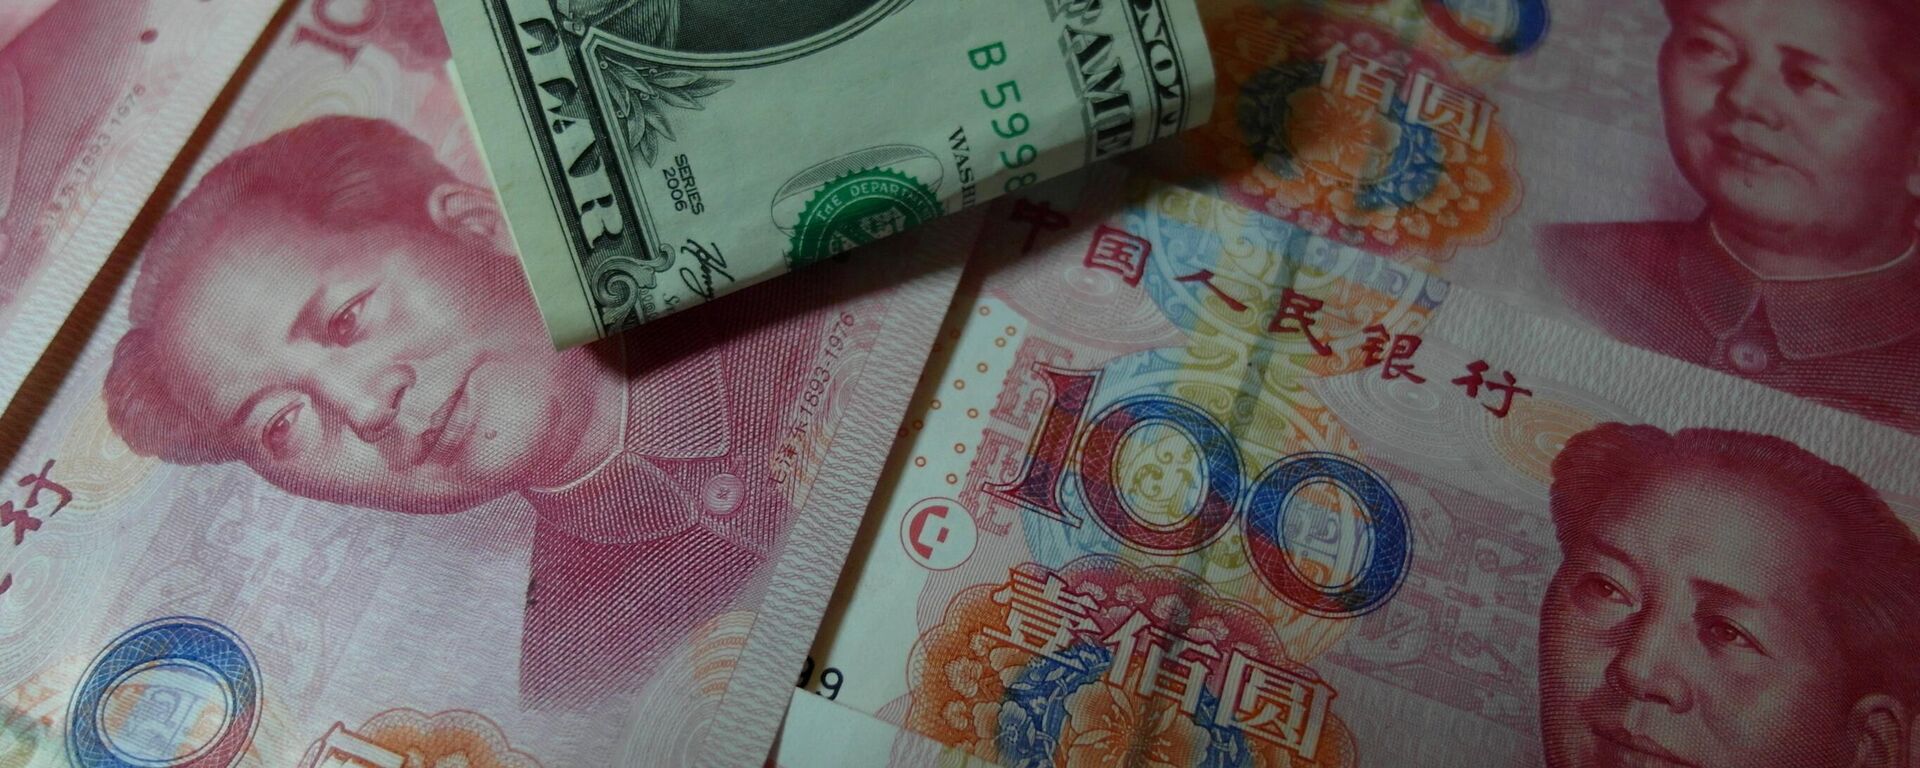 Yuan banknotes and US dollars are seen on a table in Yichang, central China's Hubei province on August 14, 2015 - Sputnik International, 1920, 11.05.2023